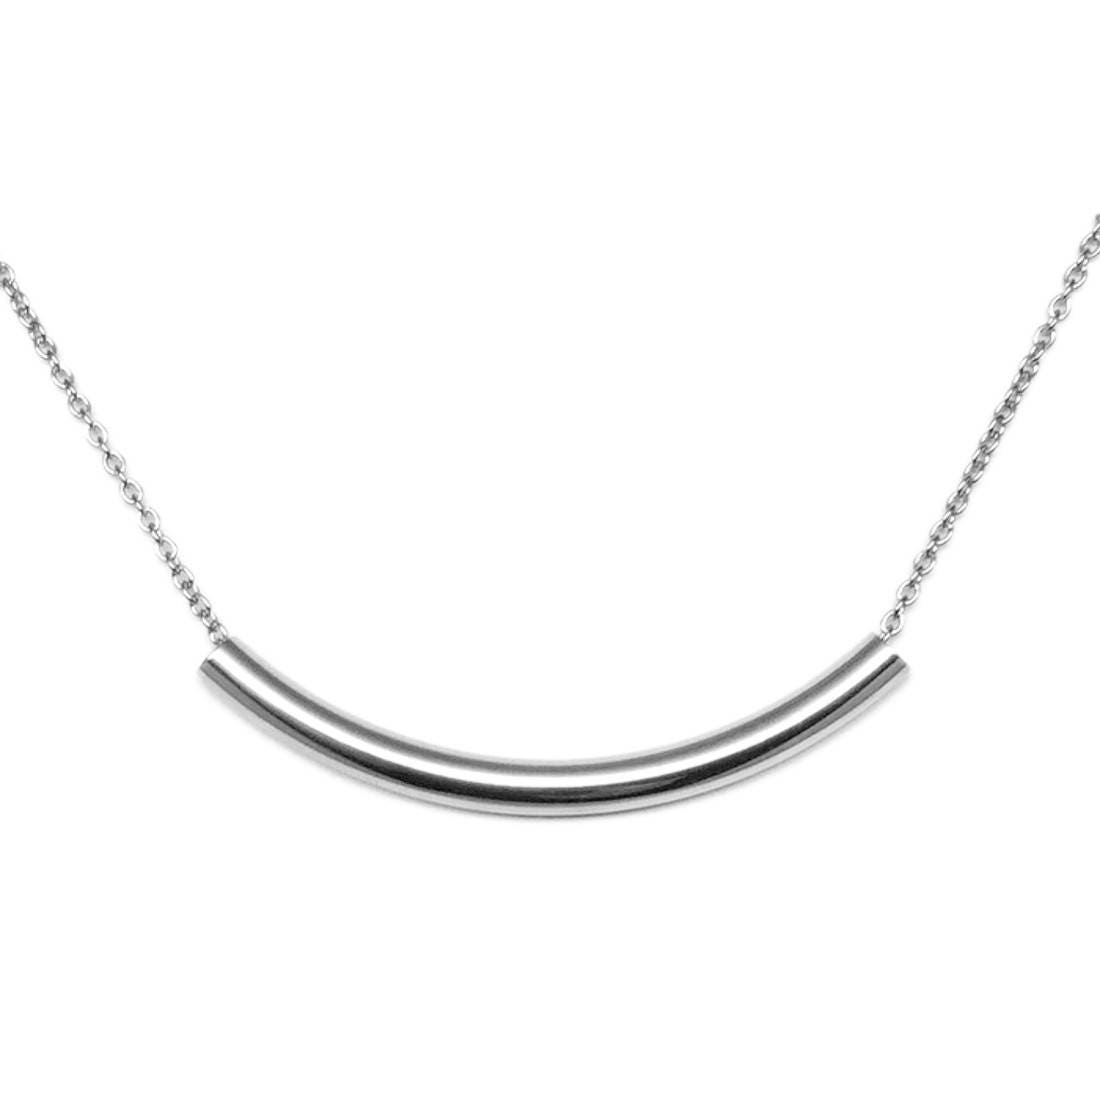 Curved Bar Necklace for Women, 316L Stainless Steel, Hypoallergenic Jewelry, Gift Ideas for Her, Minimalist Design